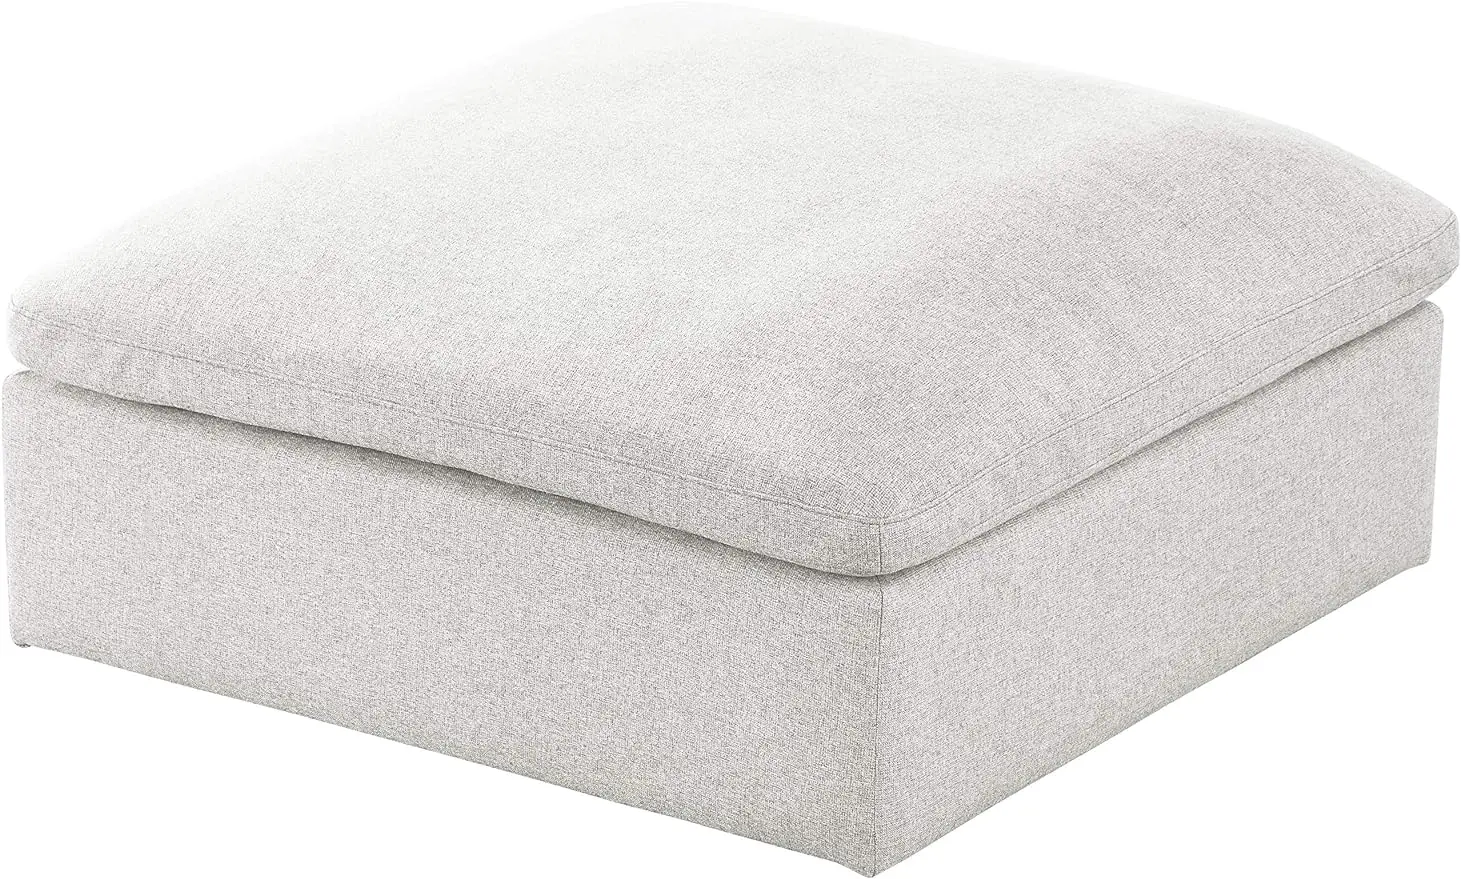 

Modern Contemporary Deluxe Comfort Ottoman, Soft Durable Linen Textured Fabric Upholstery, Down Cushions, Cream